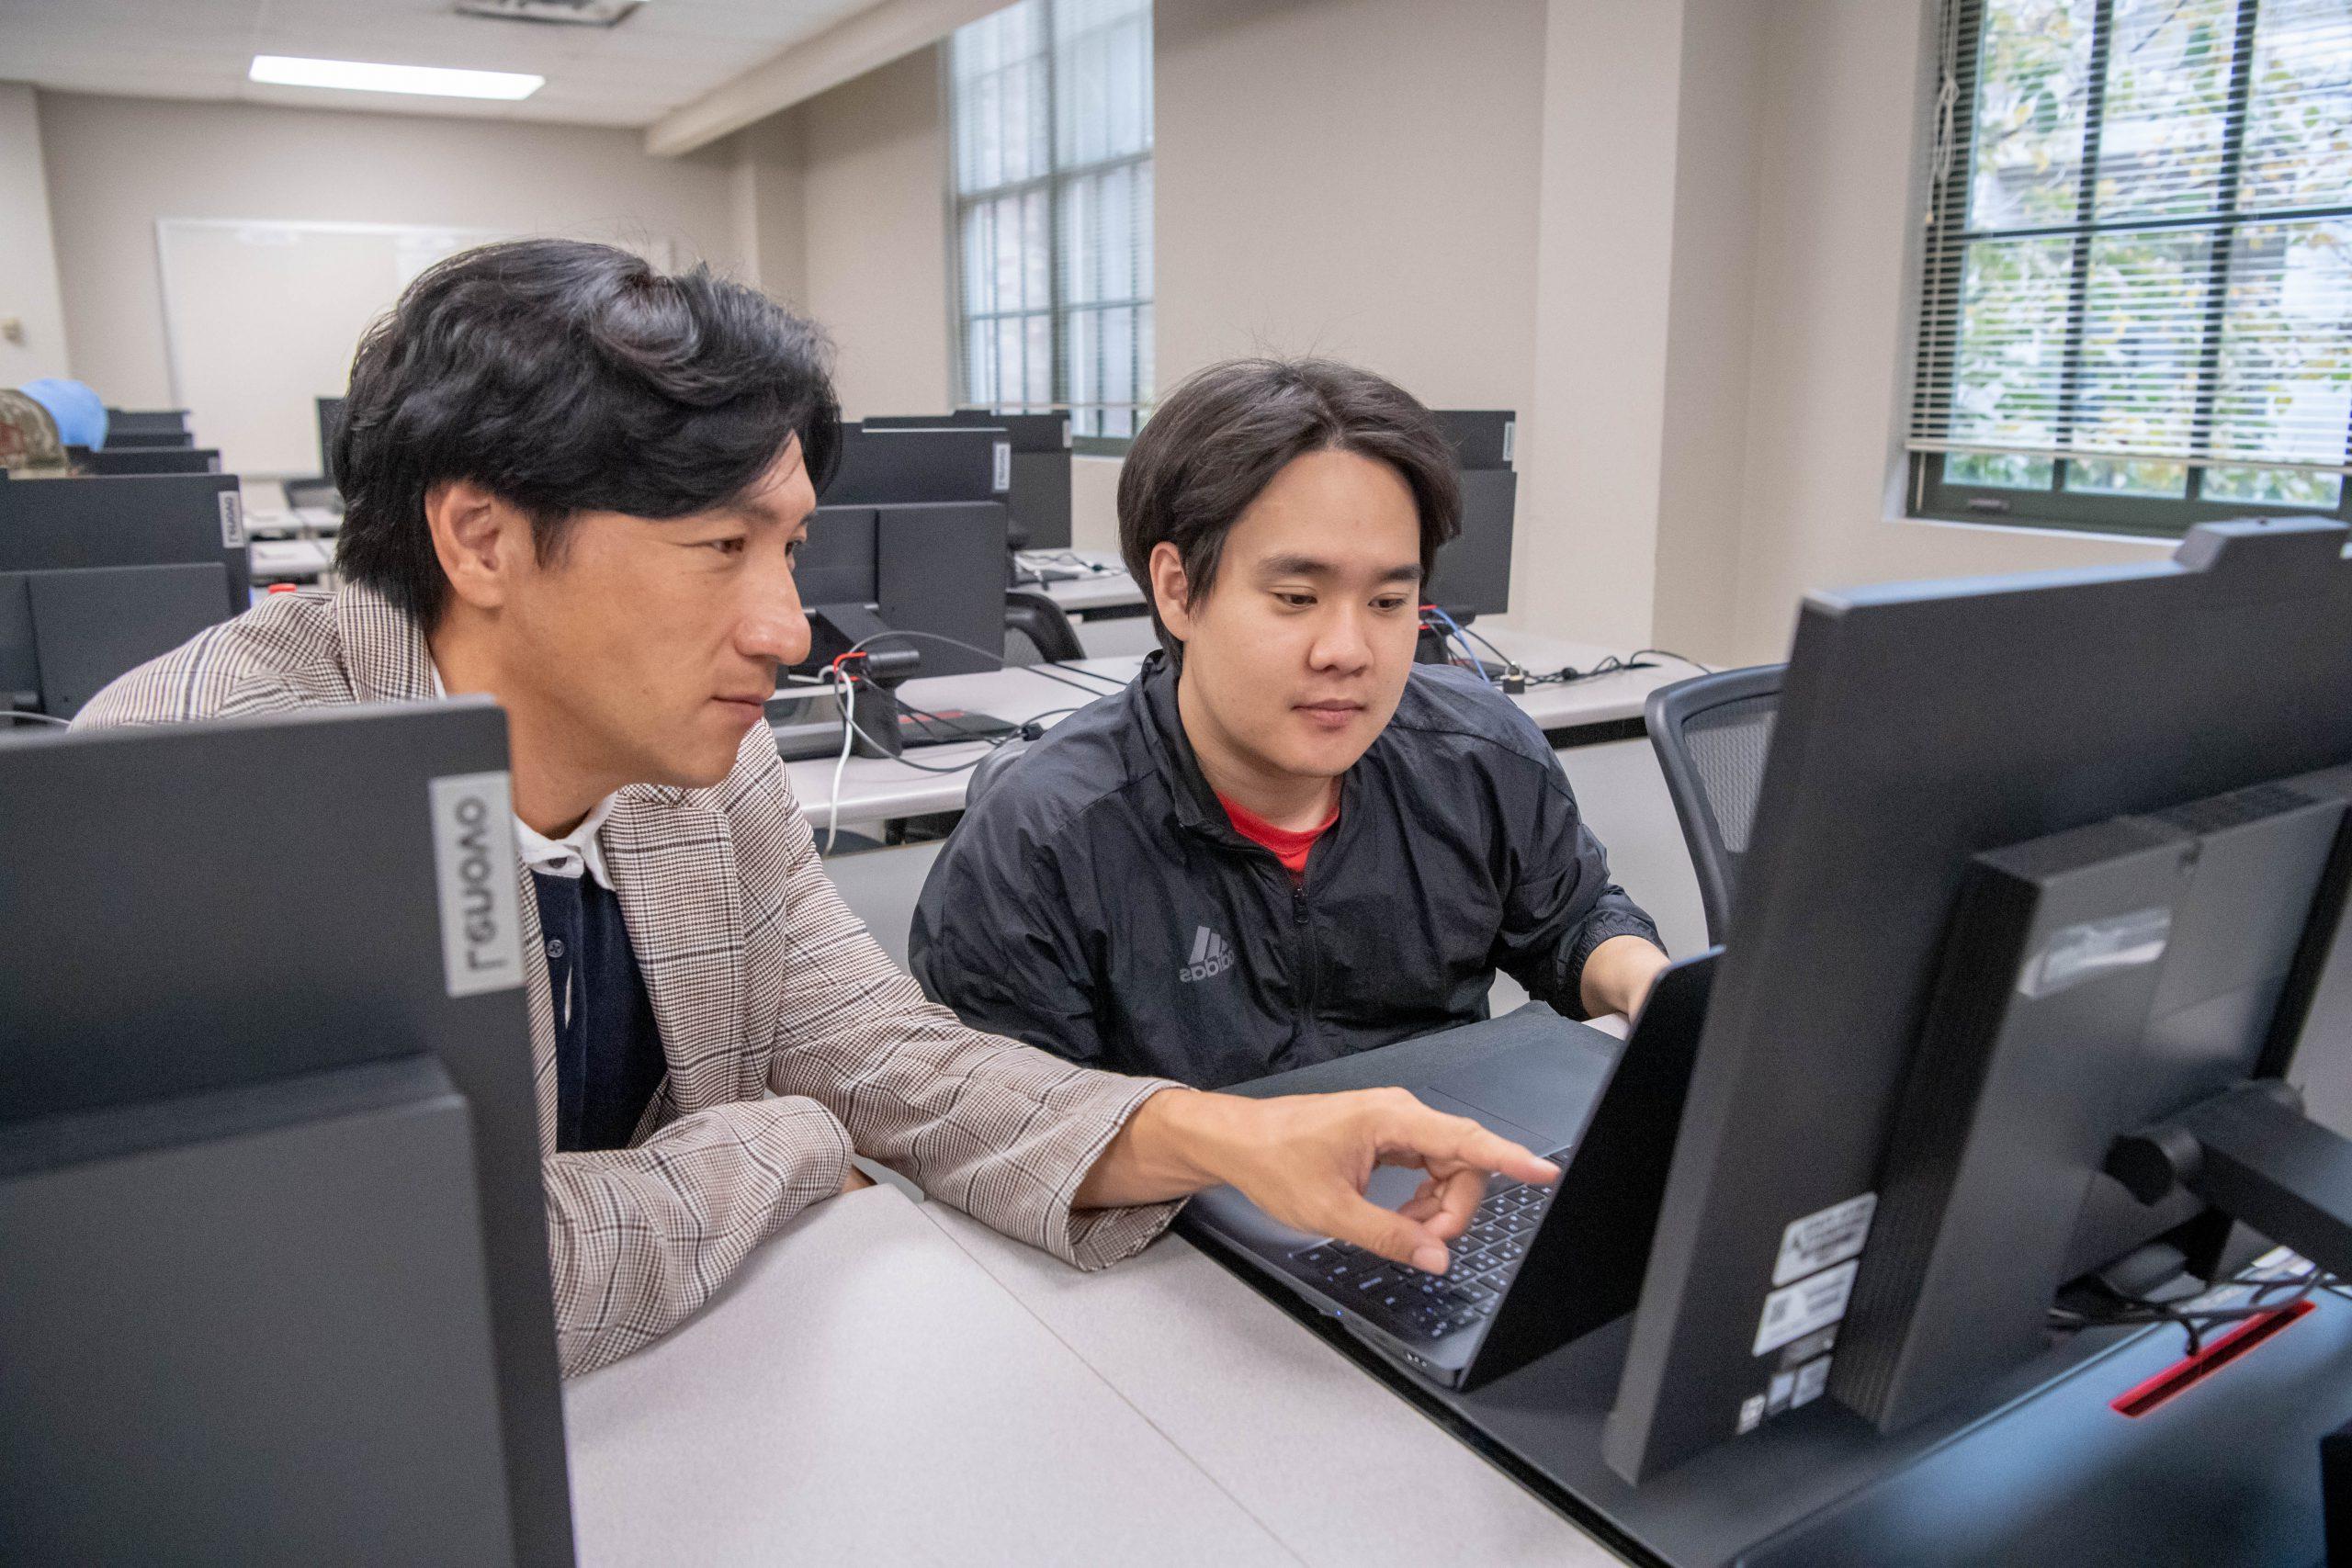 Professor sitting next to student in a computer lab, while pointing at students computer screen.